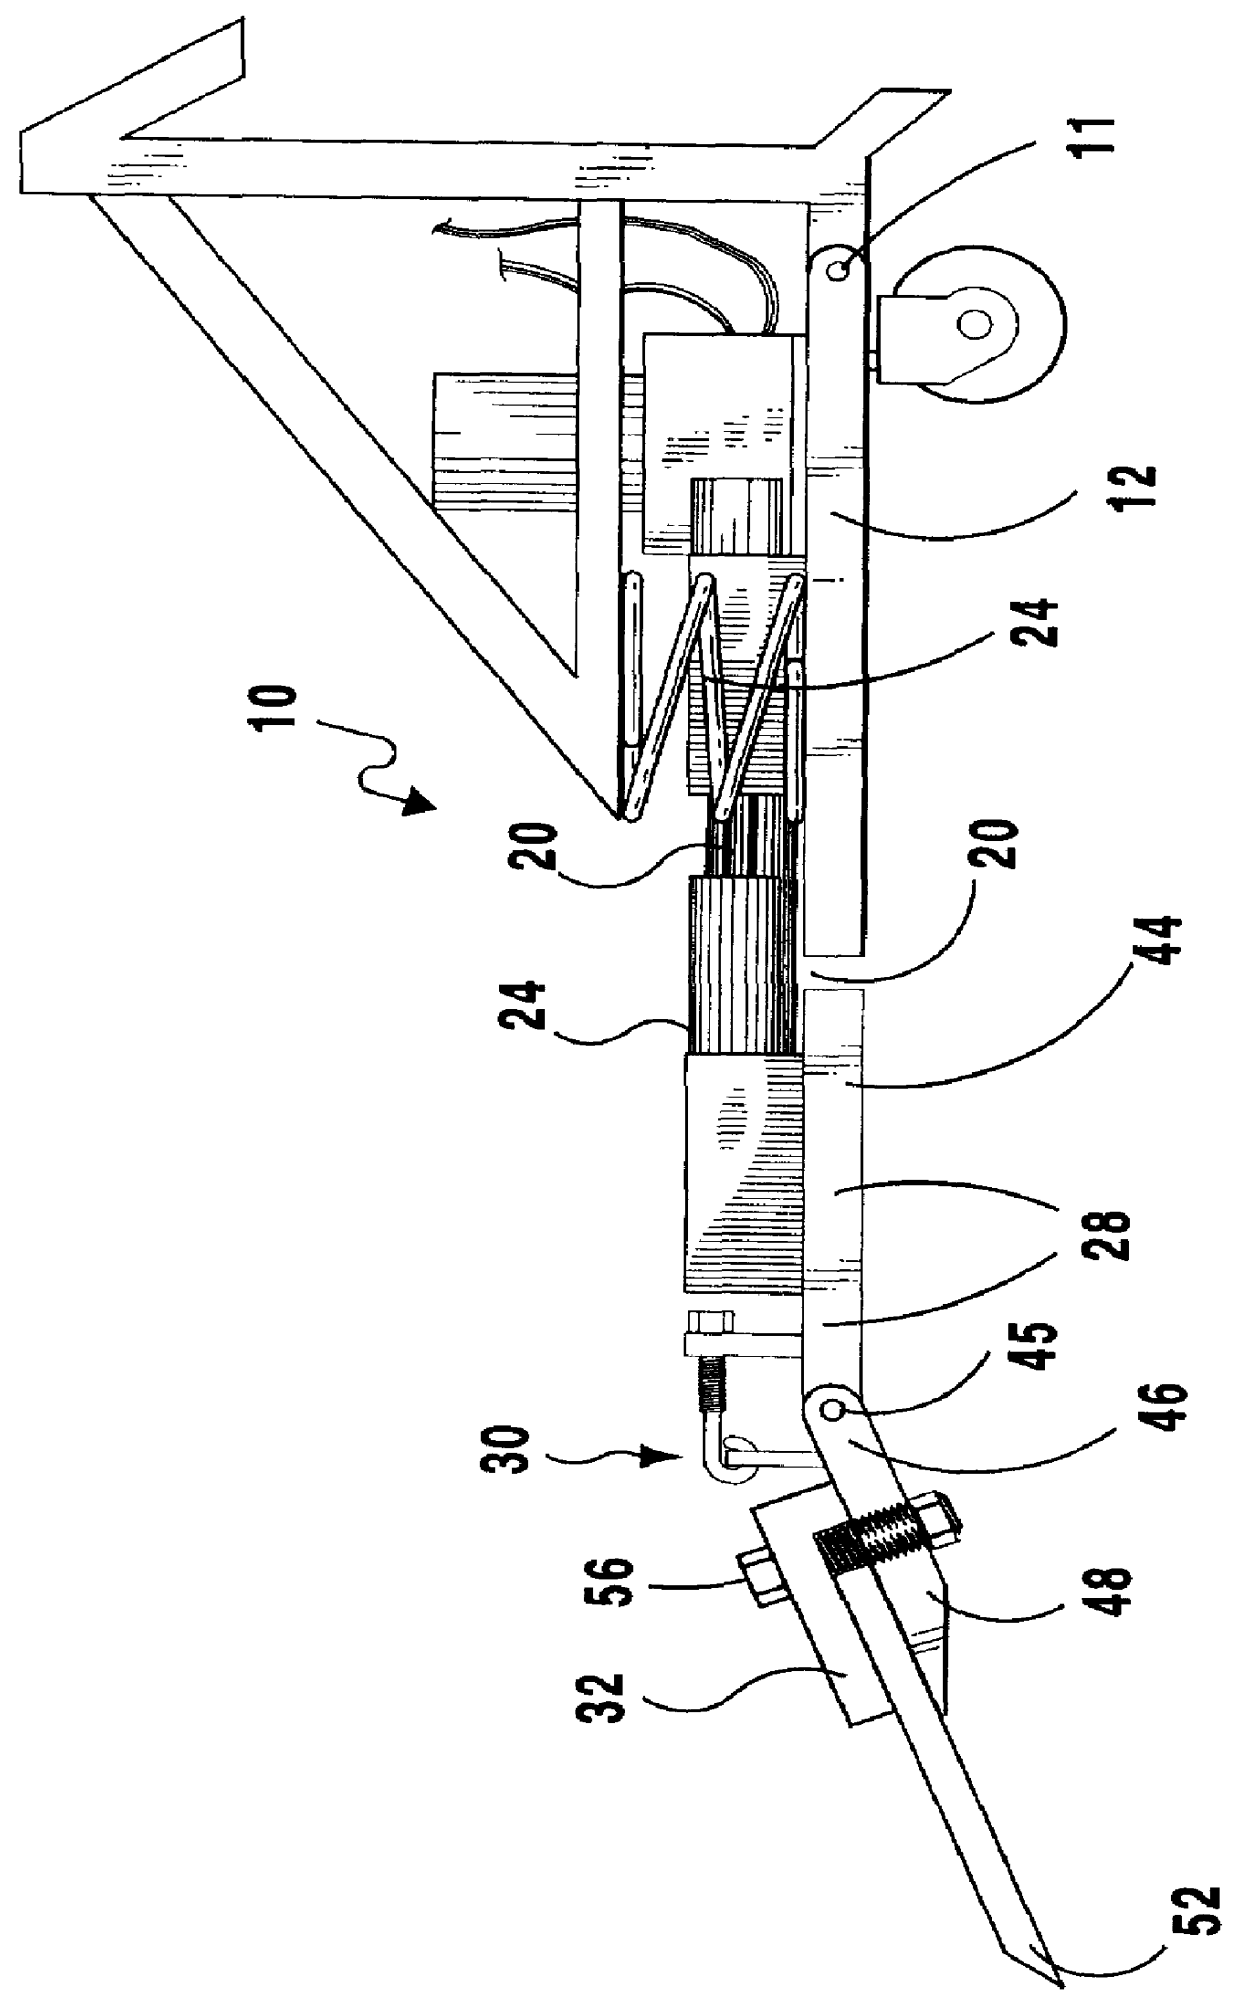 Apparatus for floor covering removal